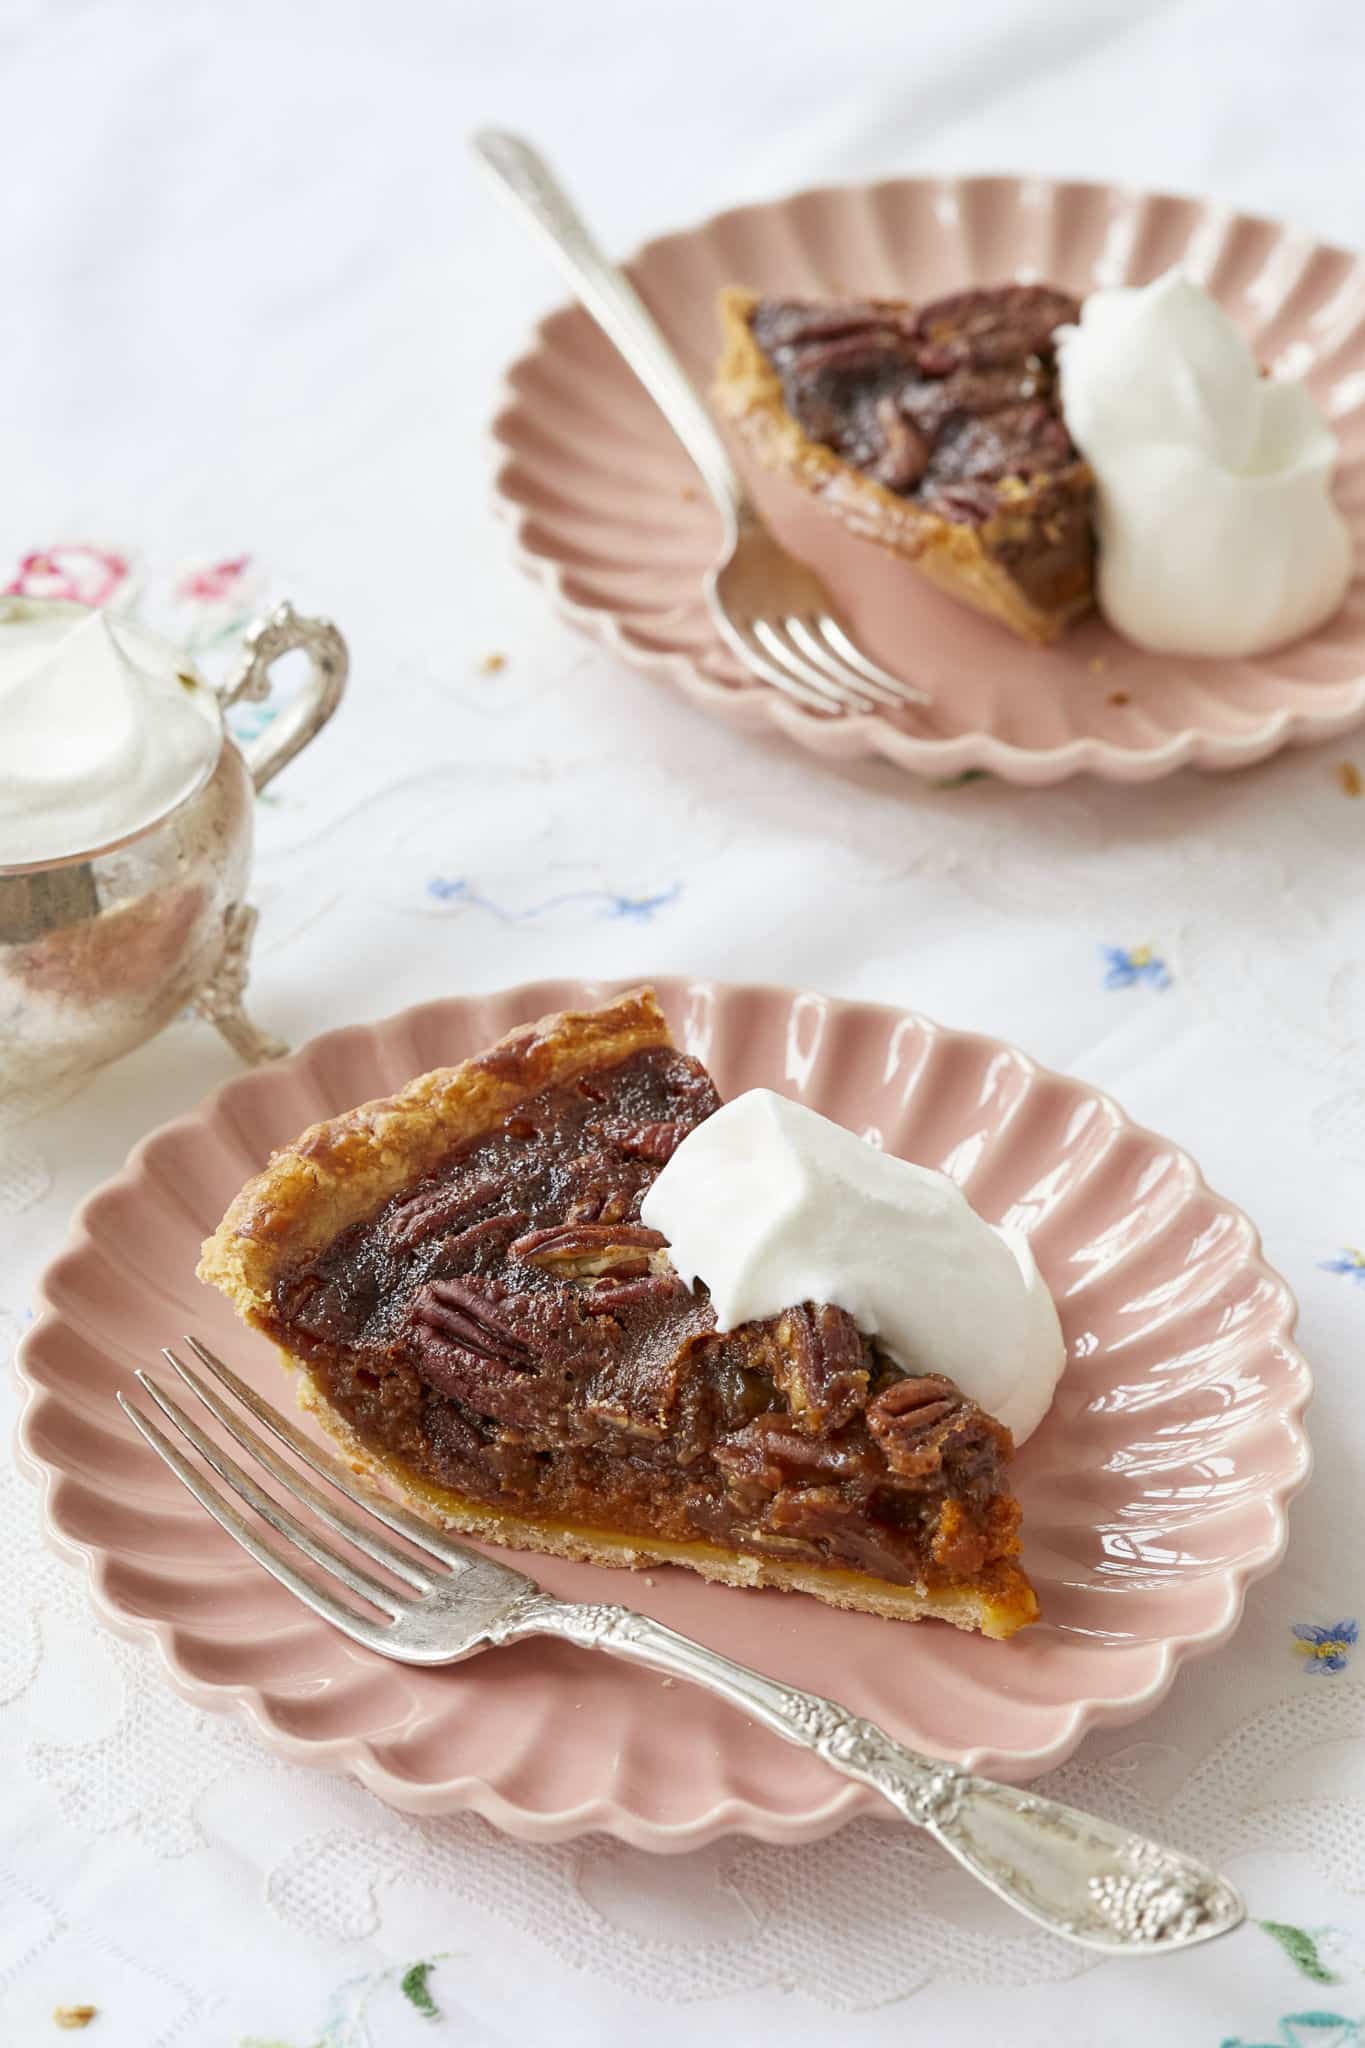 A close-up image of the pumpkin pecan pie shows the pumpkin pie layer underneath the pecan pie top layer. It is topped with fresh whipped cream./